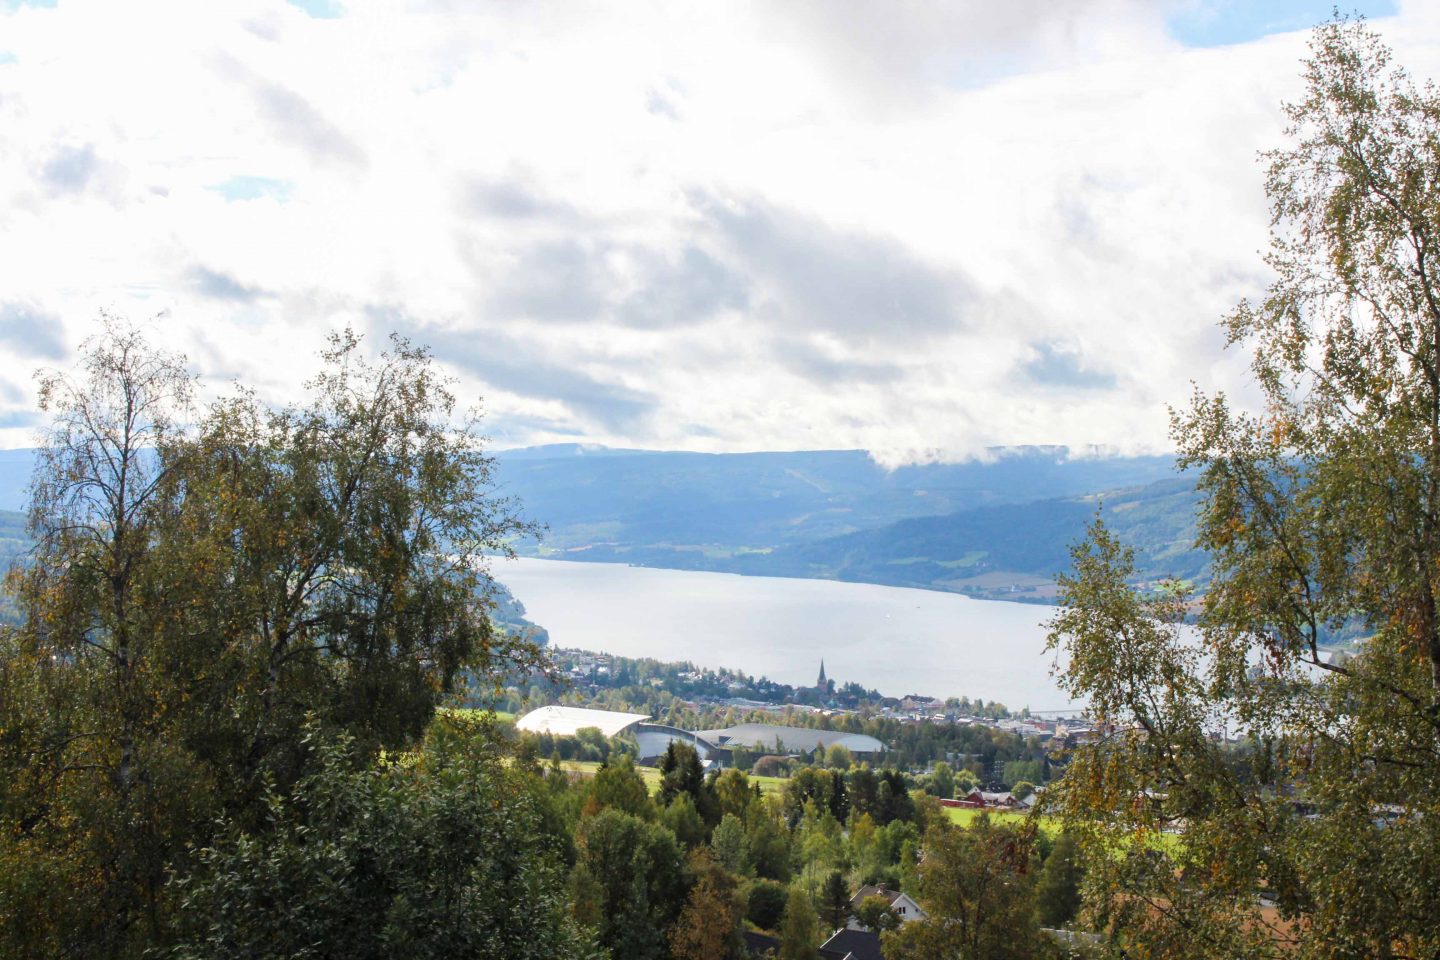 5 facts about Lillehammer, Norway.